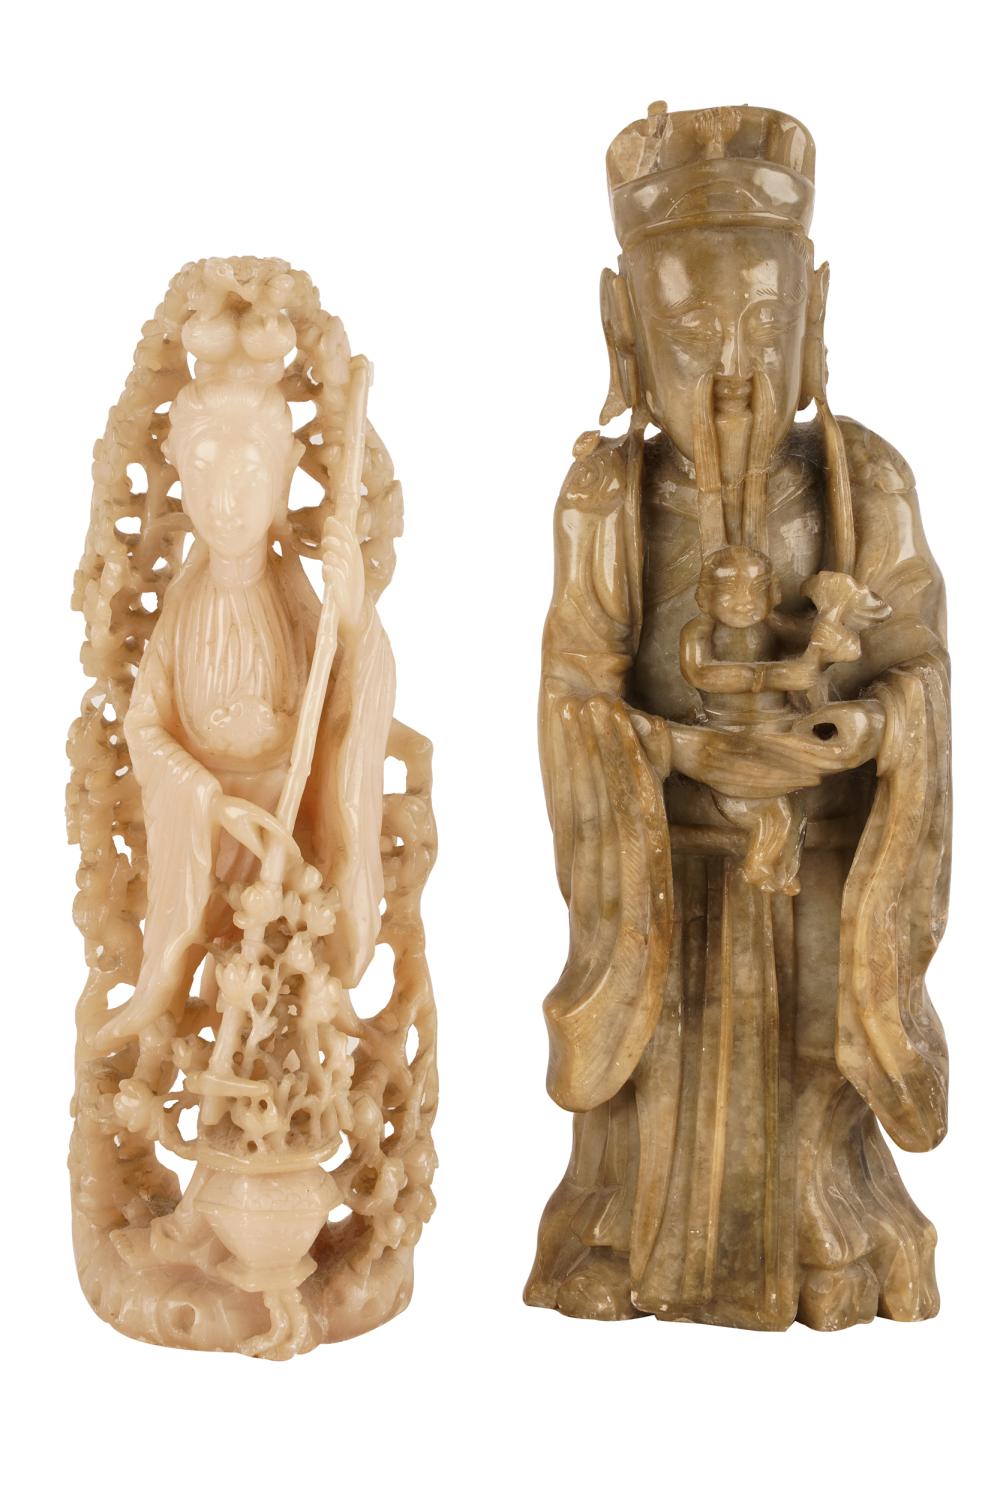 TWO ASIAN SOAPSTONE FIGURAL CARVINGSof 33330a